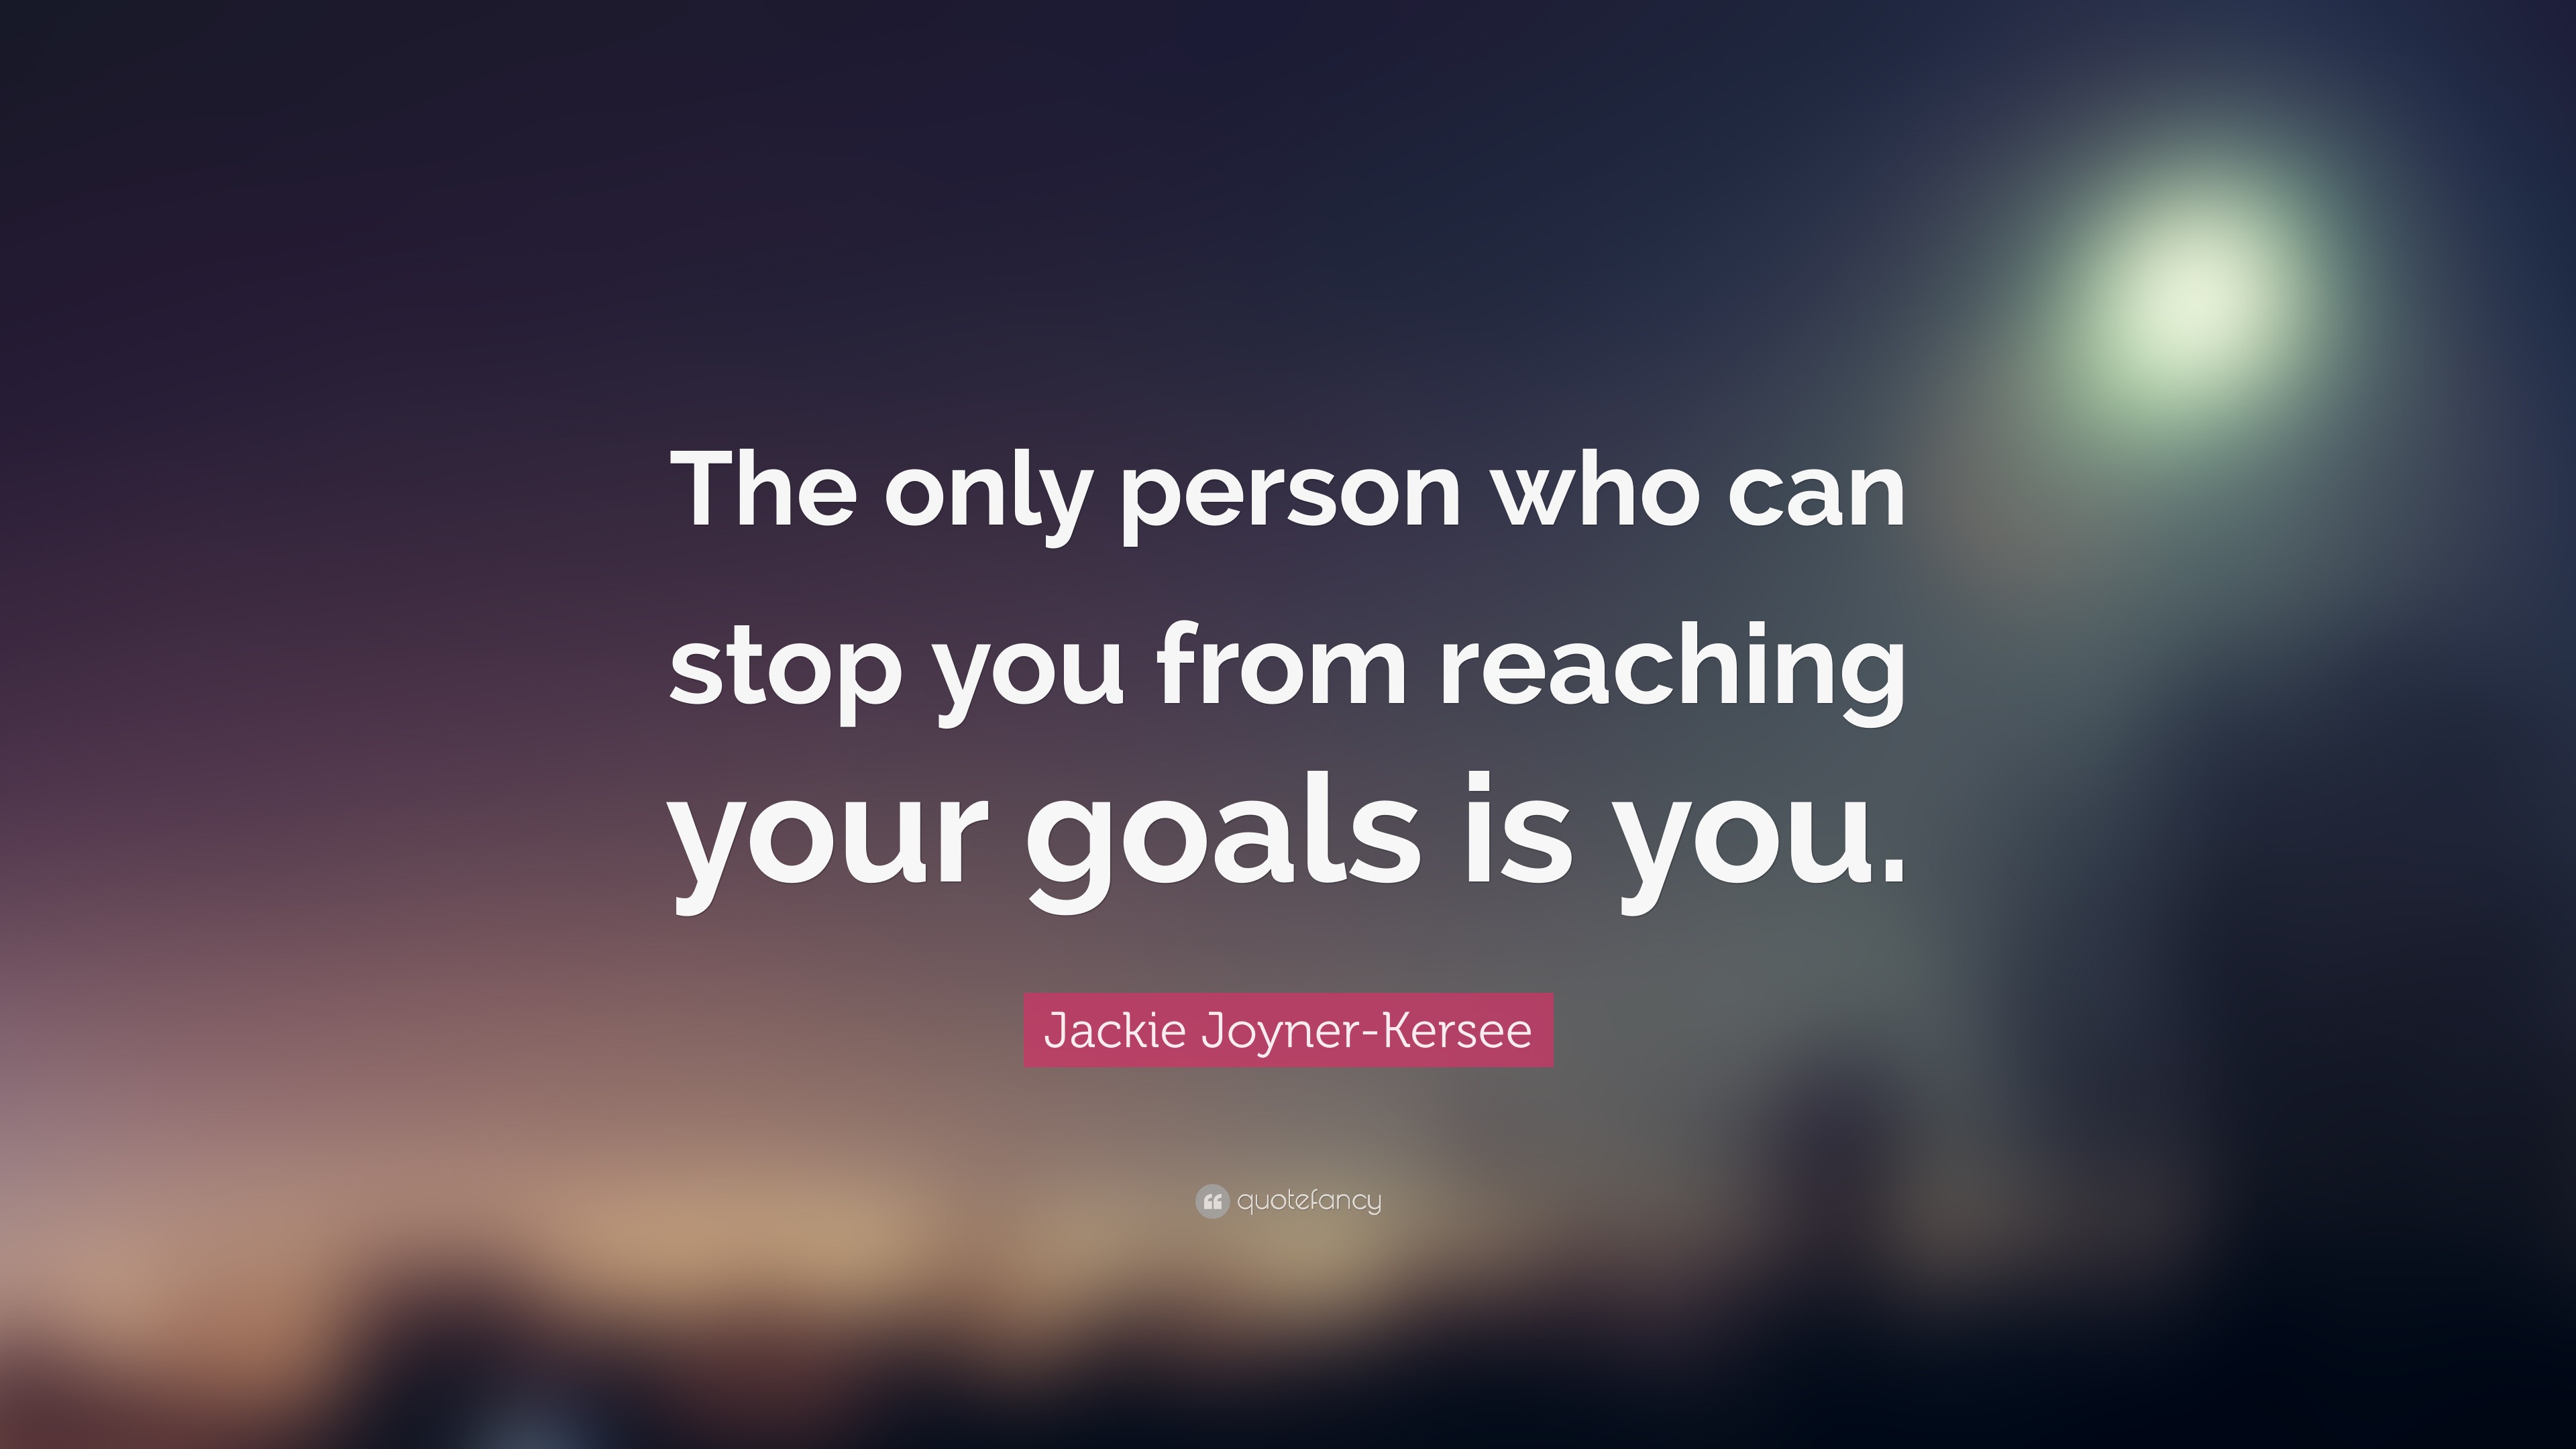 Jackie Joyner-Kersee Quote: “The only person who can stop you from ...